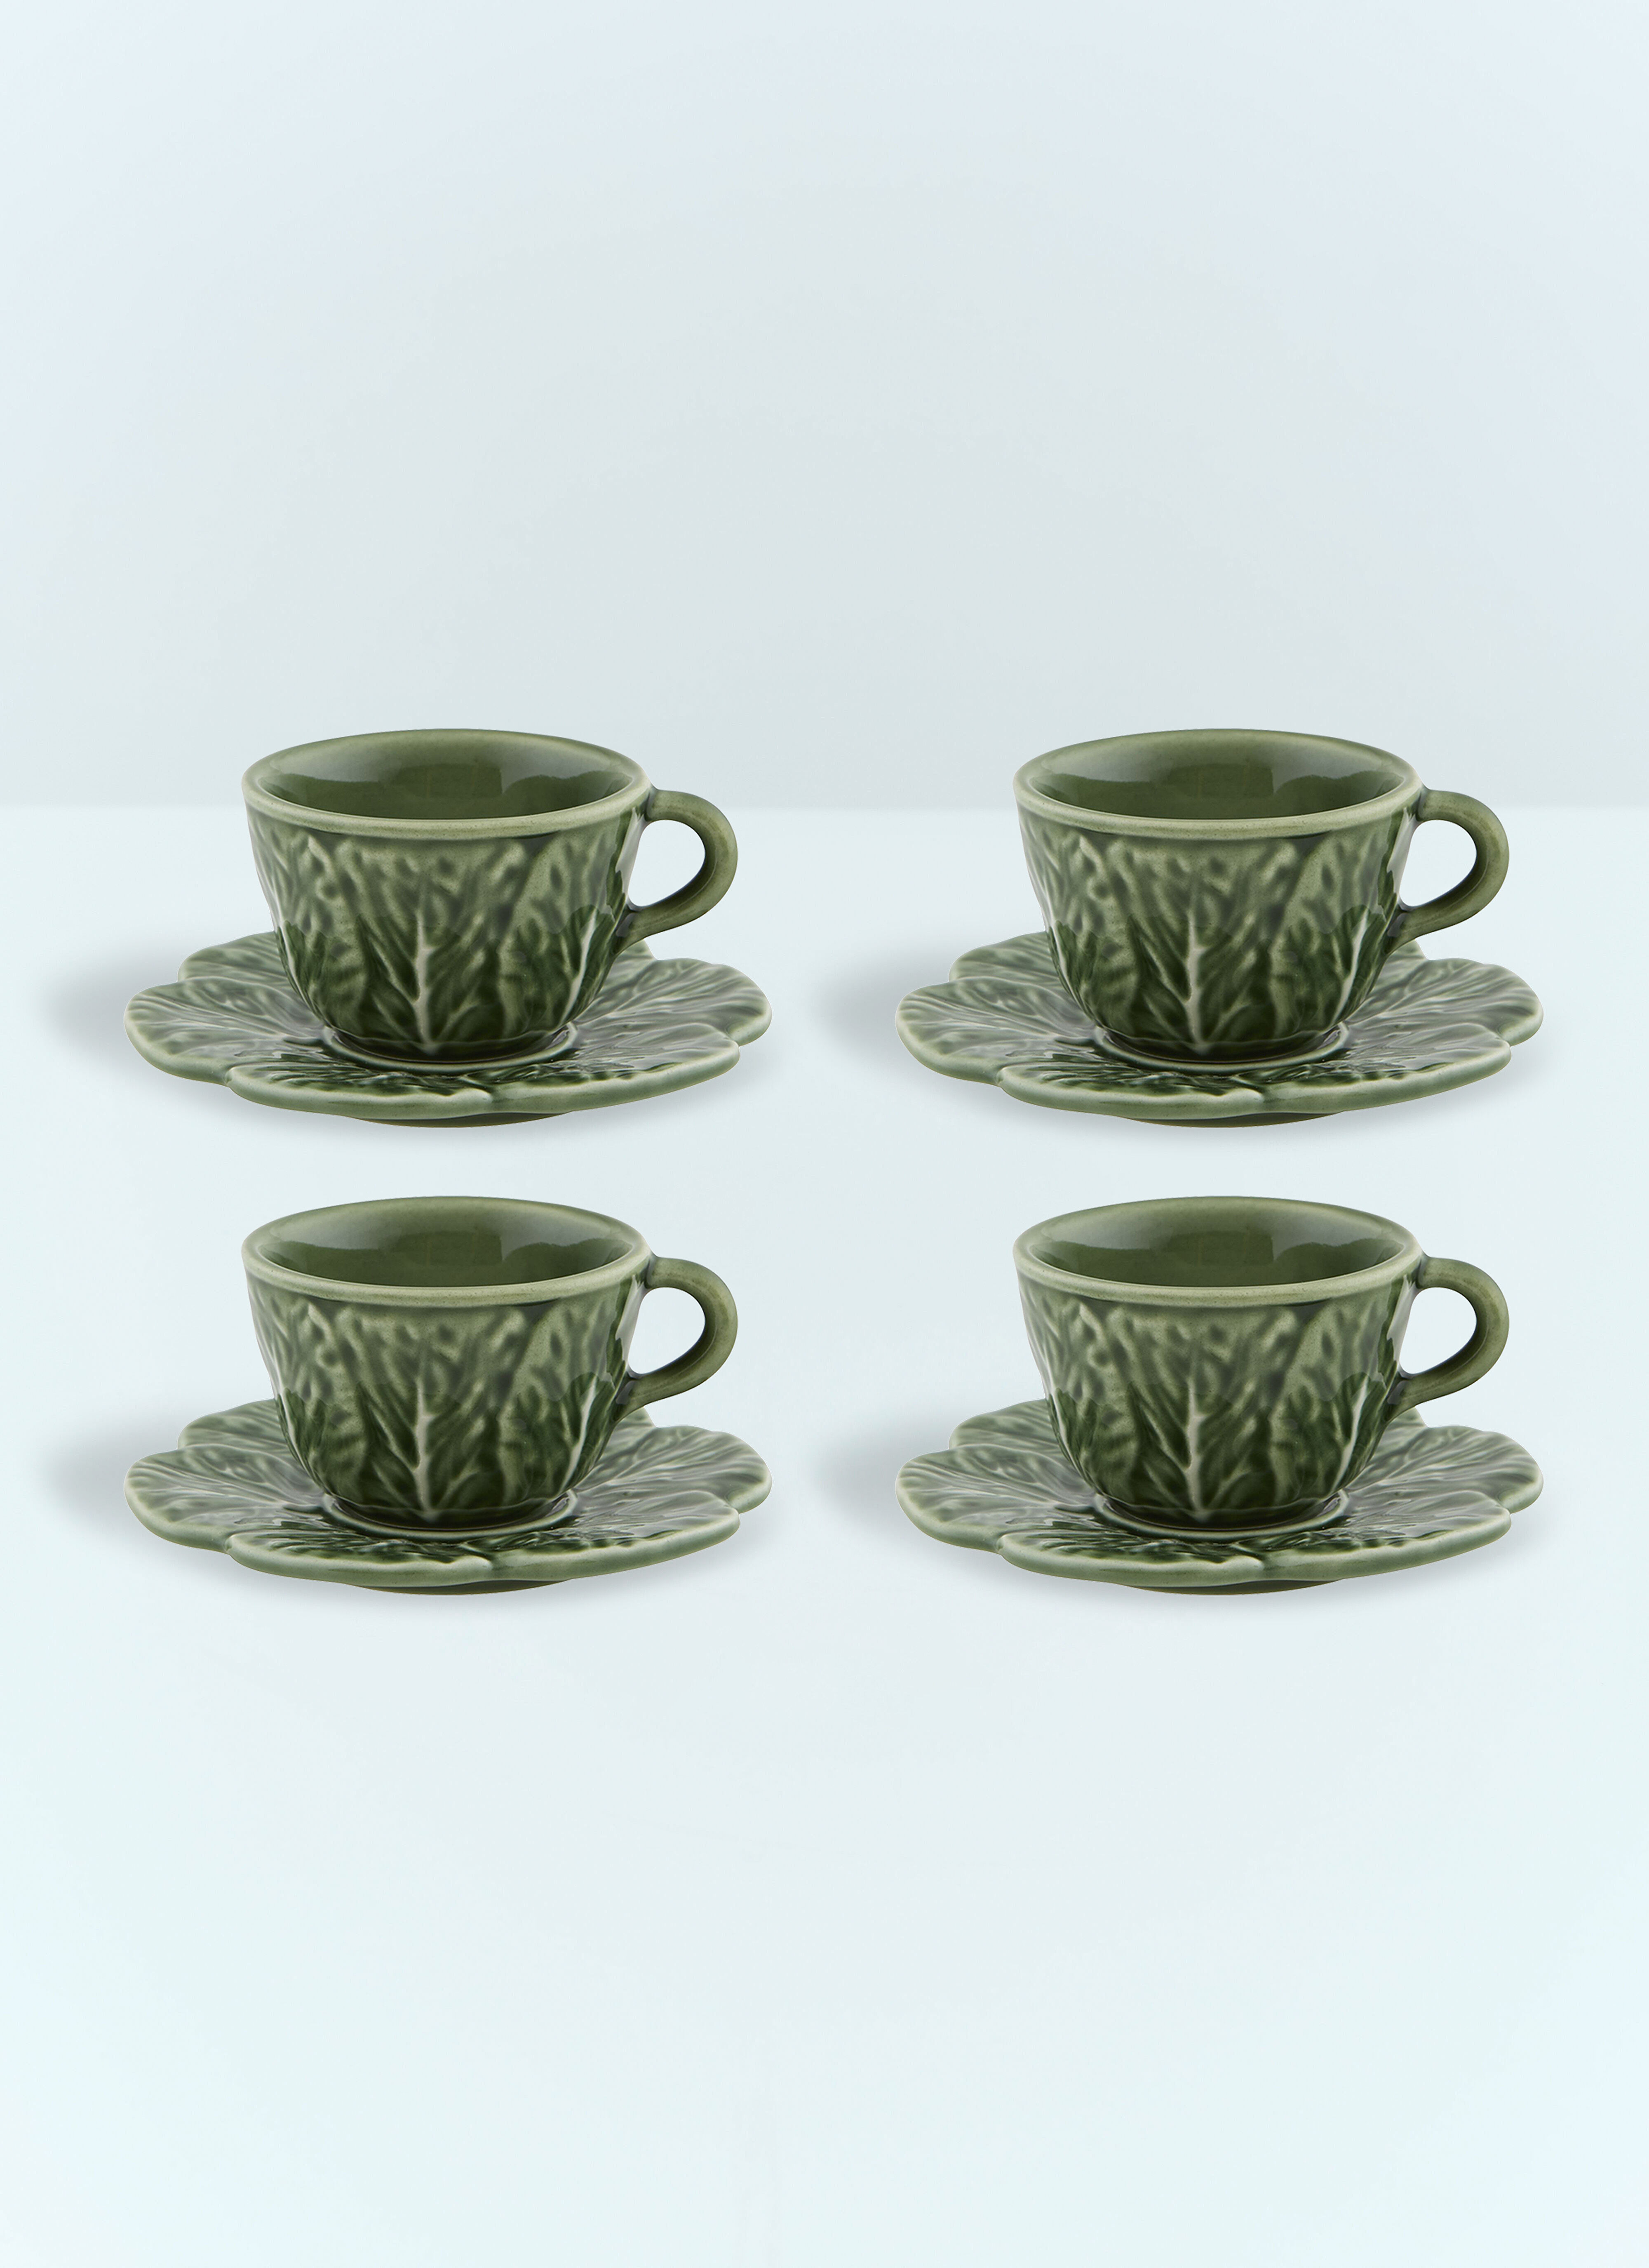 Polspotten Set Of Four Couve Coffee Cups And Saucers Blue wps0691152